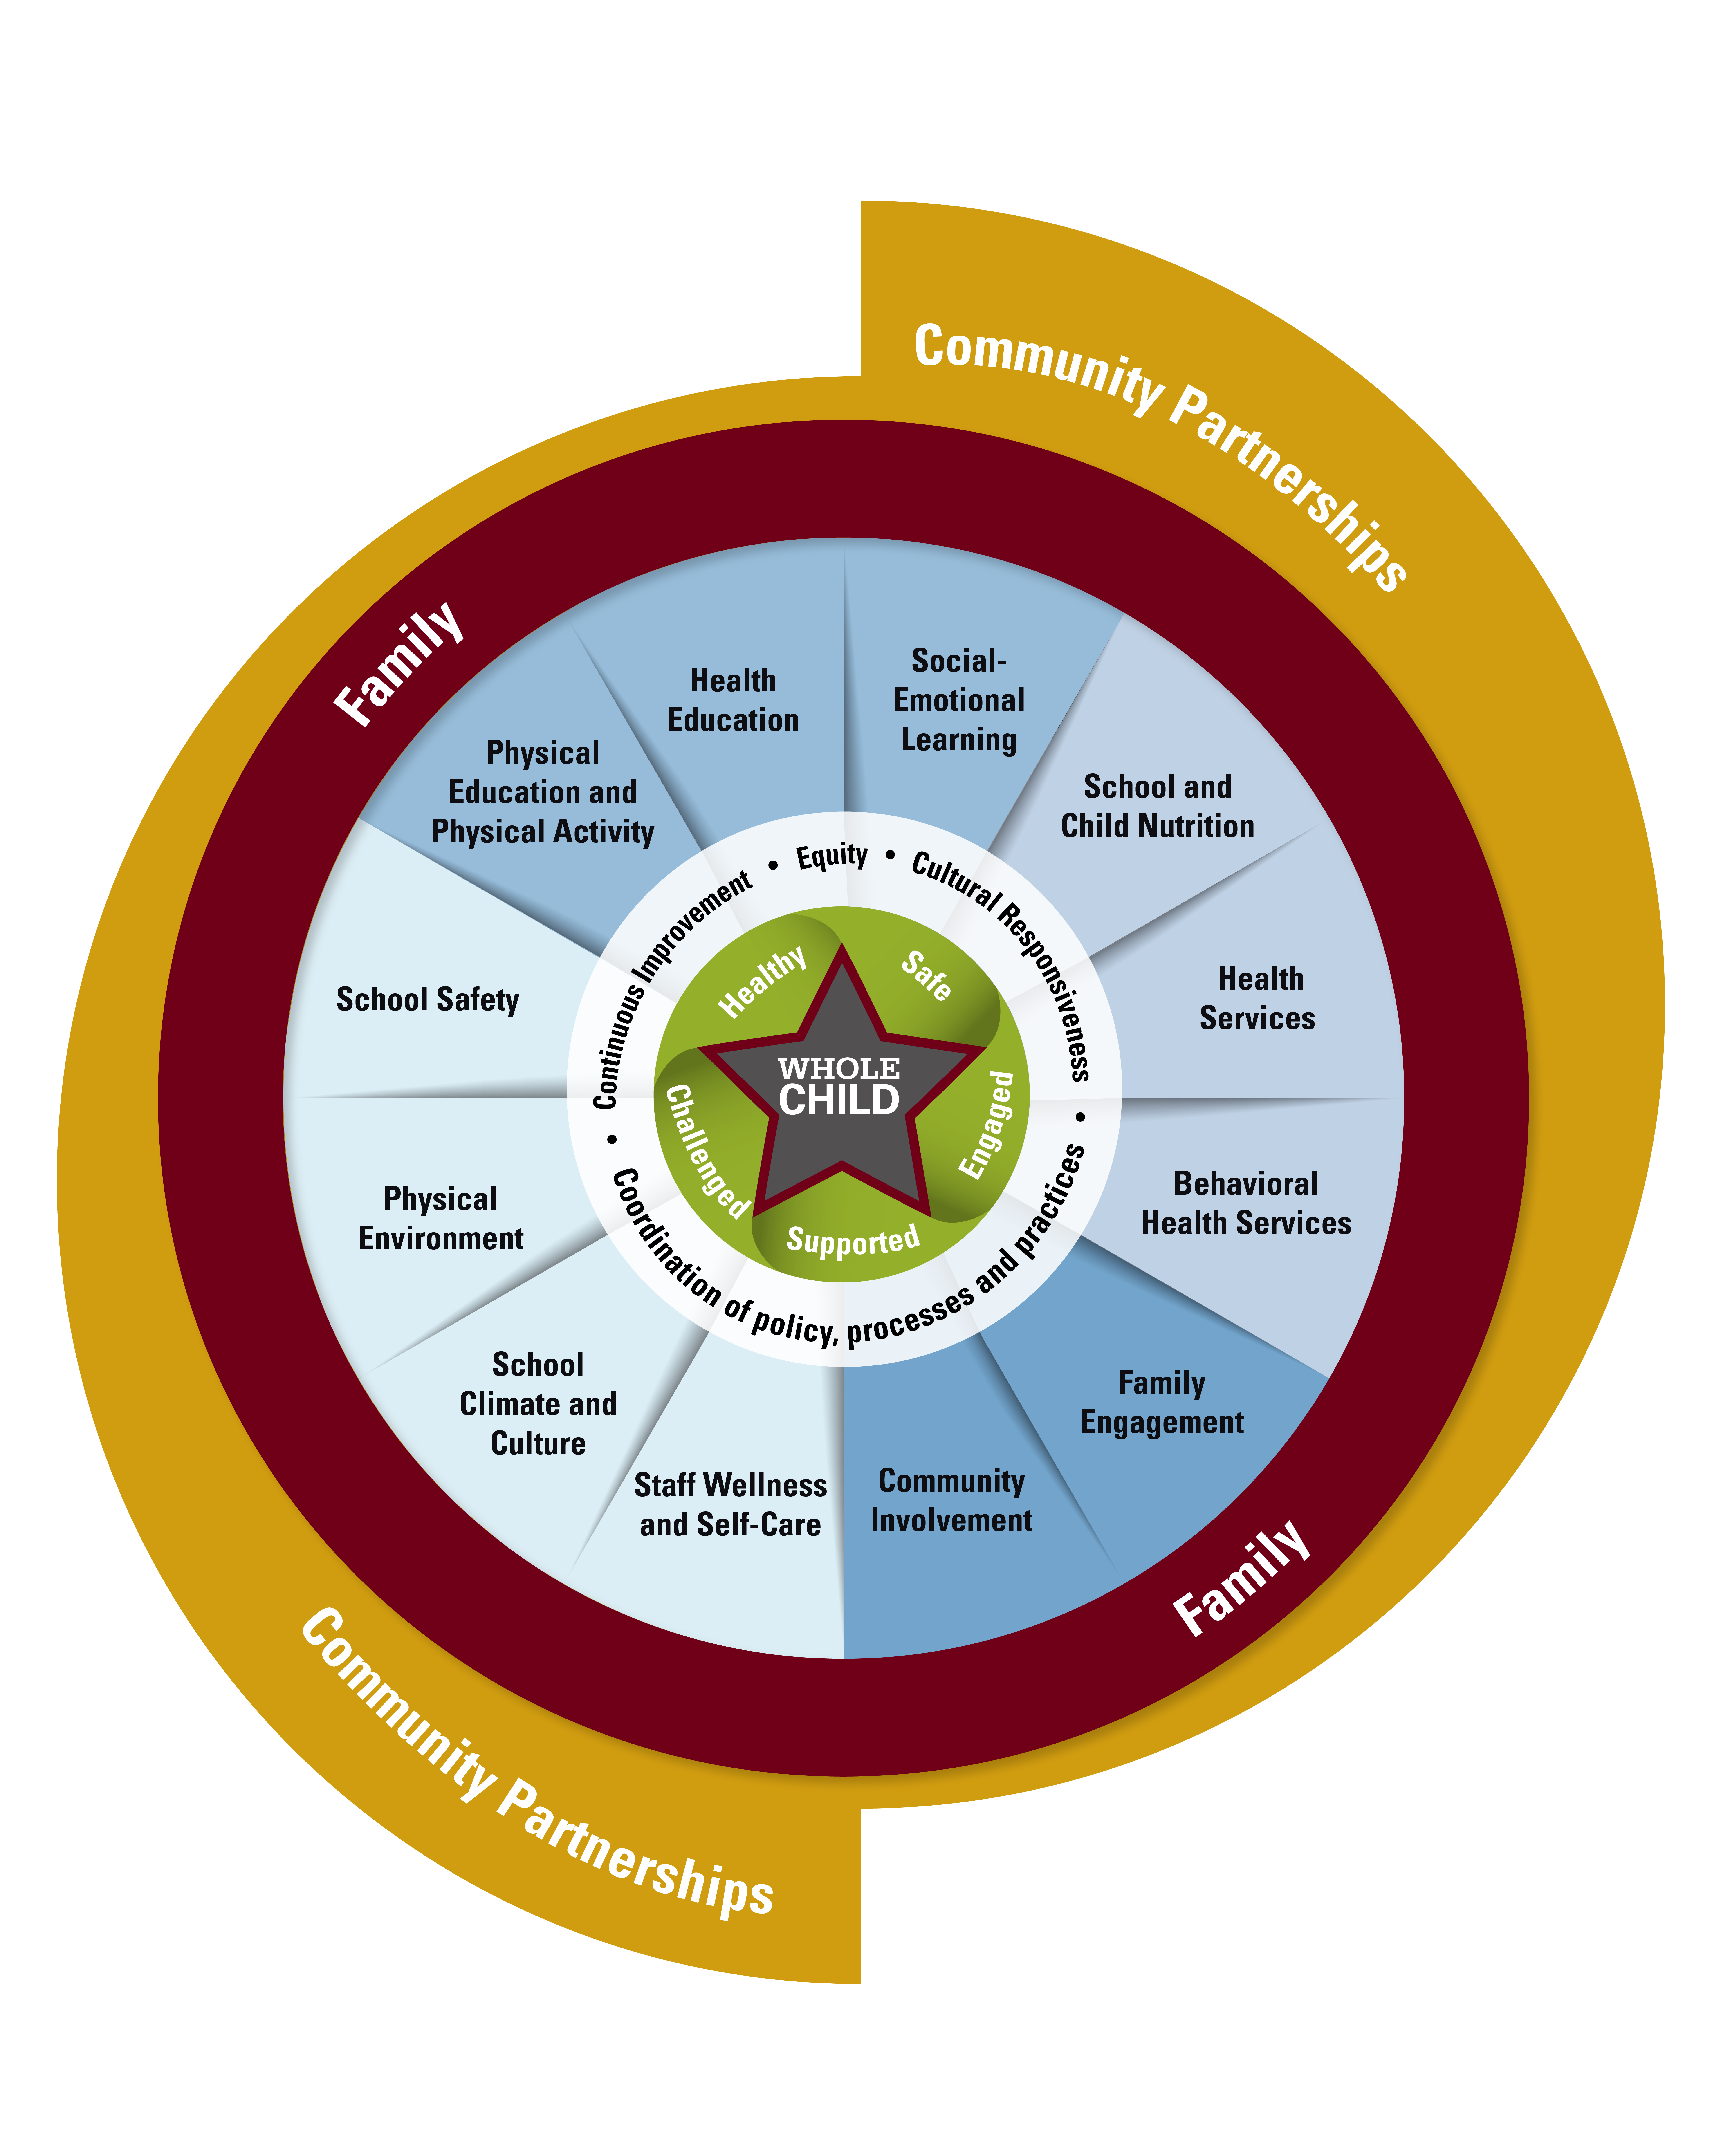 The tenants of Ohio's Whole Child Framework, with bands of community partnerships in yellow and family highlighted in maroon and used in the center around the whole child star to indicate its importance.